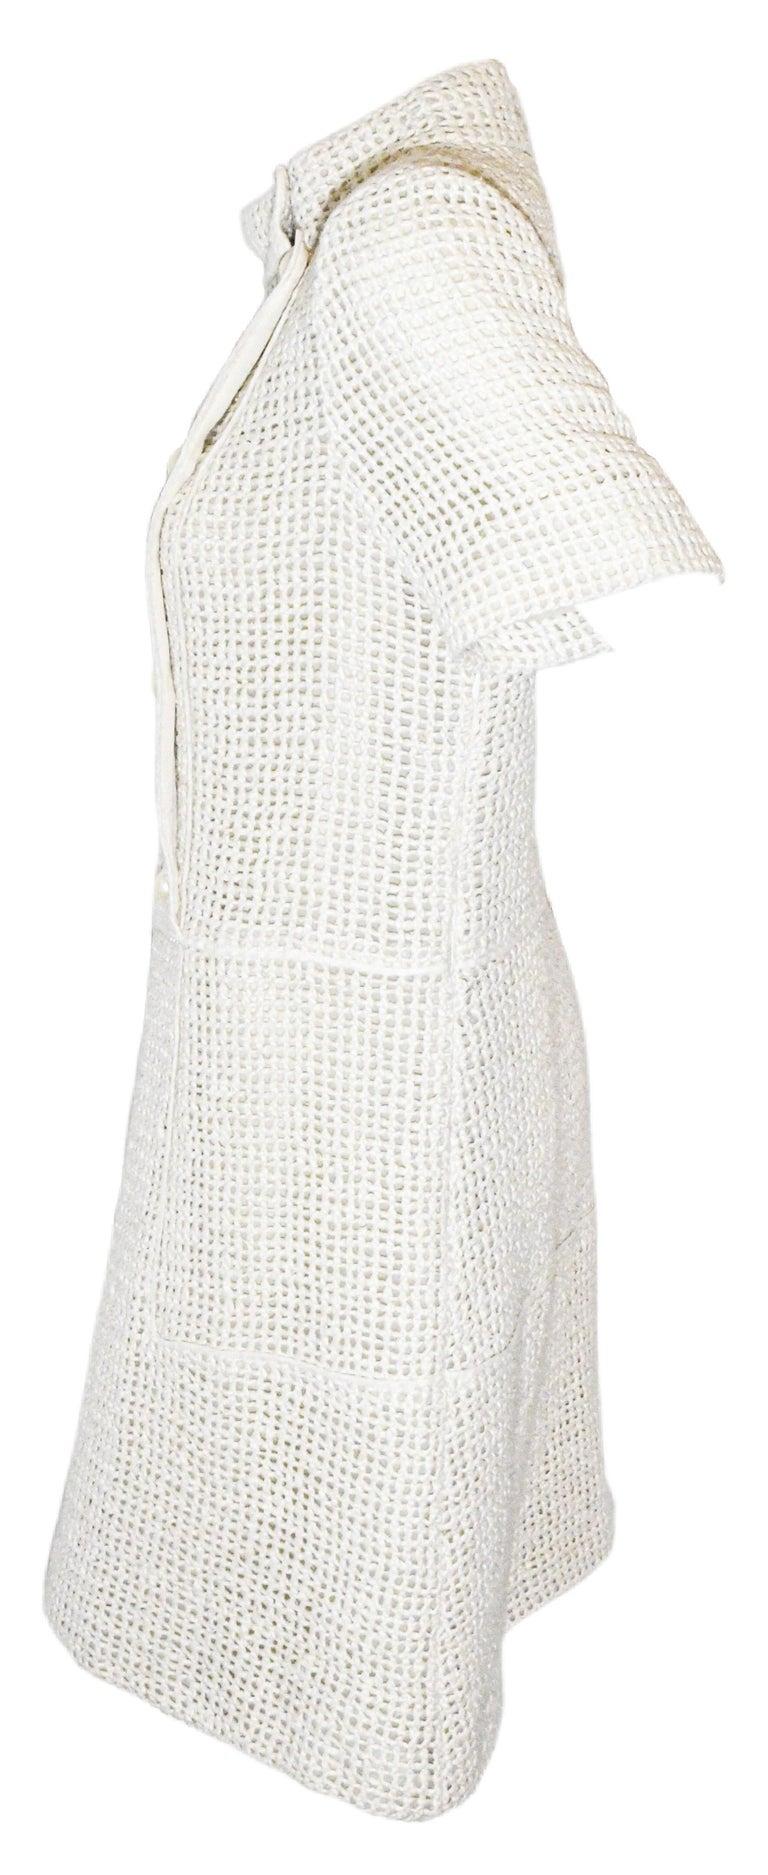 Chanel cream short sleeve Lesage tweed  crochet dress includes 8 faux pearl Chanel embossed buttons at front  and a funnel collar.  This A line dress fits a bit loose to the body contains ivory silk trim at waist and below hip.  For closure a side